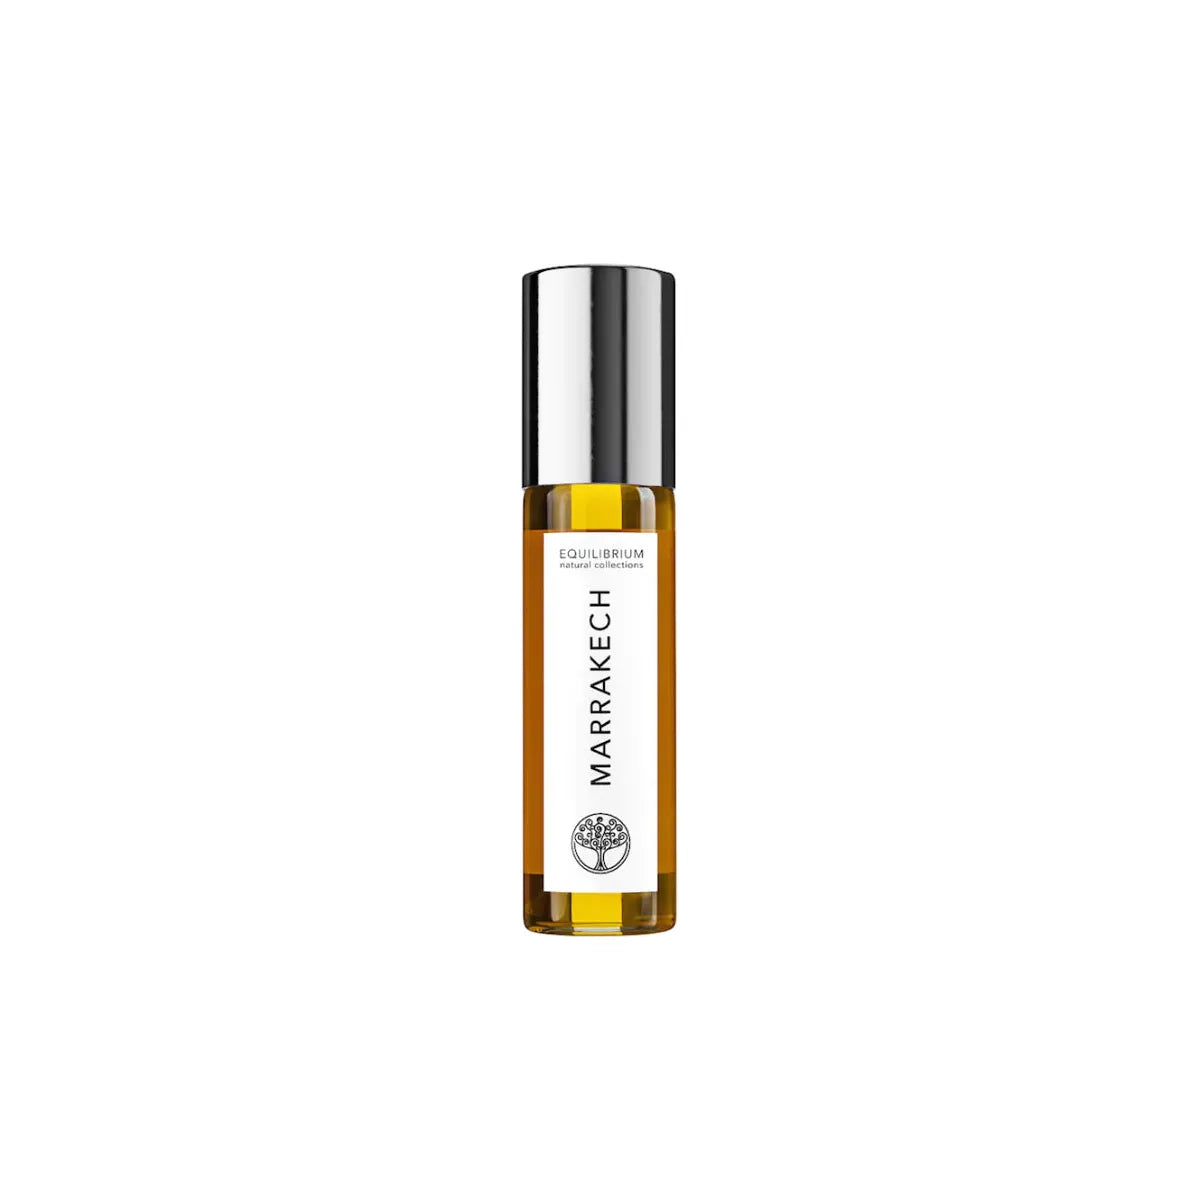 Equilibrium Natural Collections Perfume Therapy Oil: Marrakech